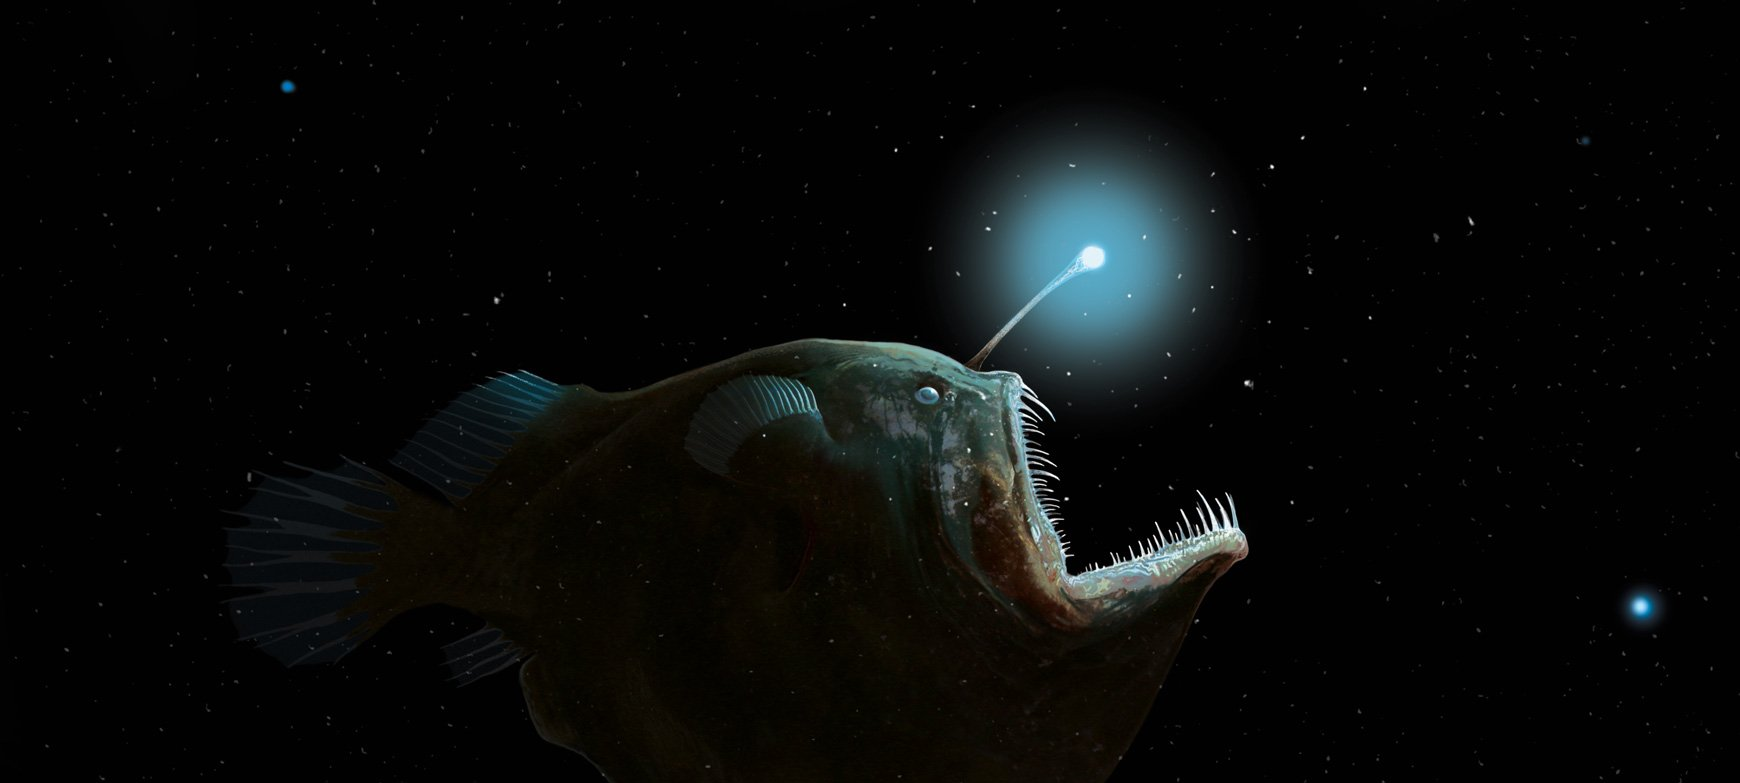 Let's work together. Get in touch... I don't bite! Here we see a photorealistic digital painting of a Black Devil Anglerfish, or Seadevil, a deep sea creature and an unusual ugly fish with a gaping mouth, needle-sharp teeth, a slightly startled expression and an illuminated lure at the top of its head. Natural history ocean life illustration.